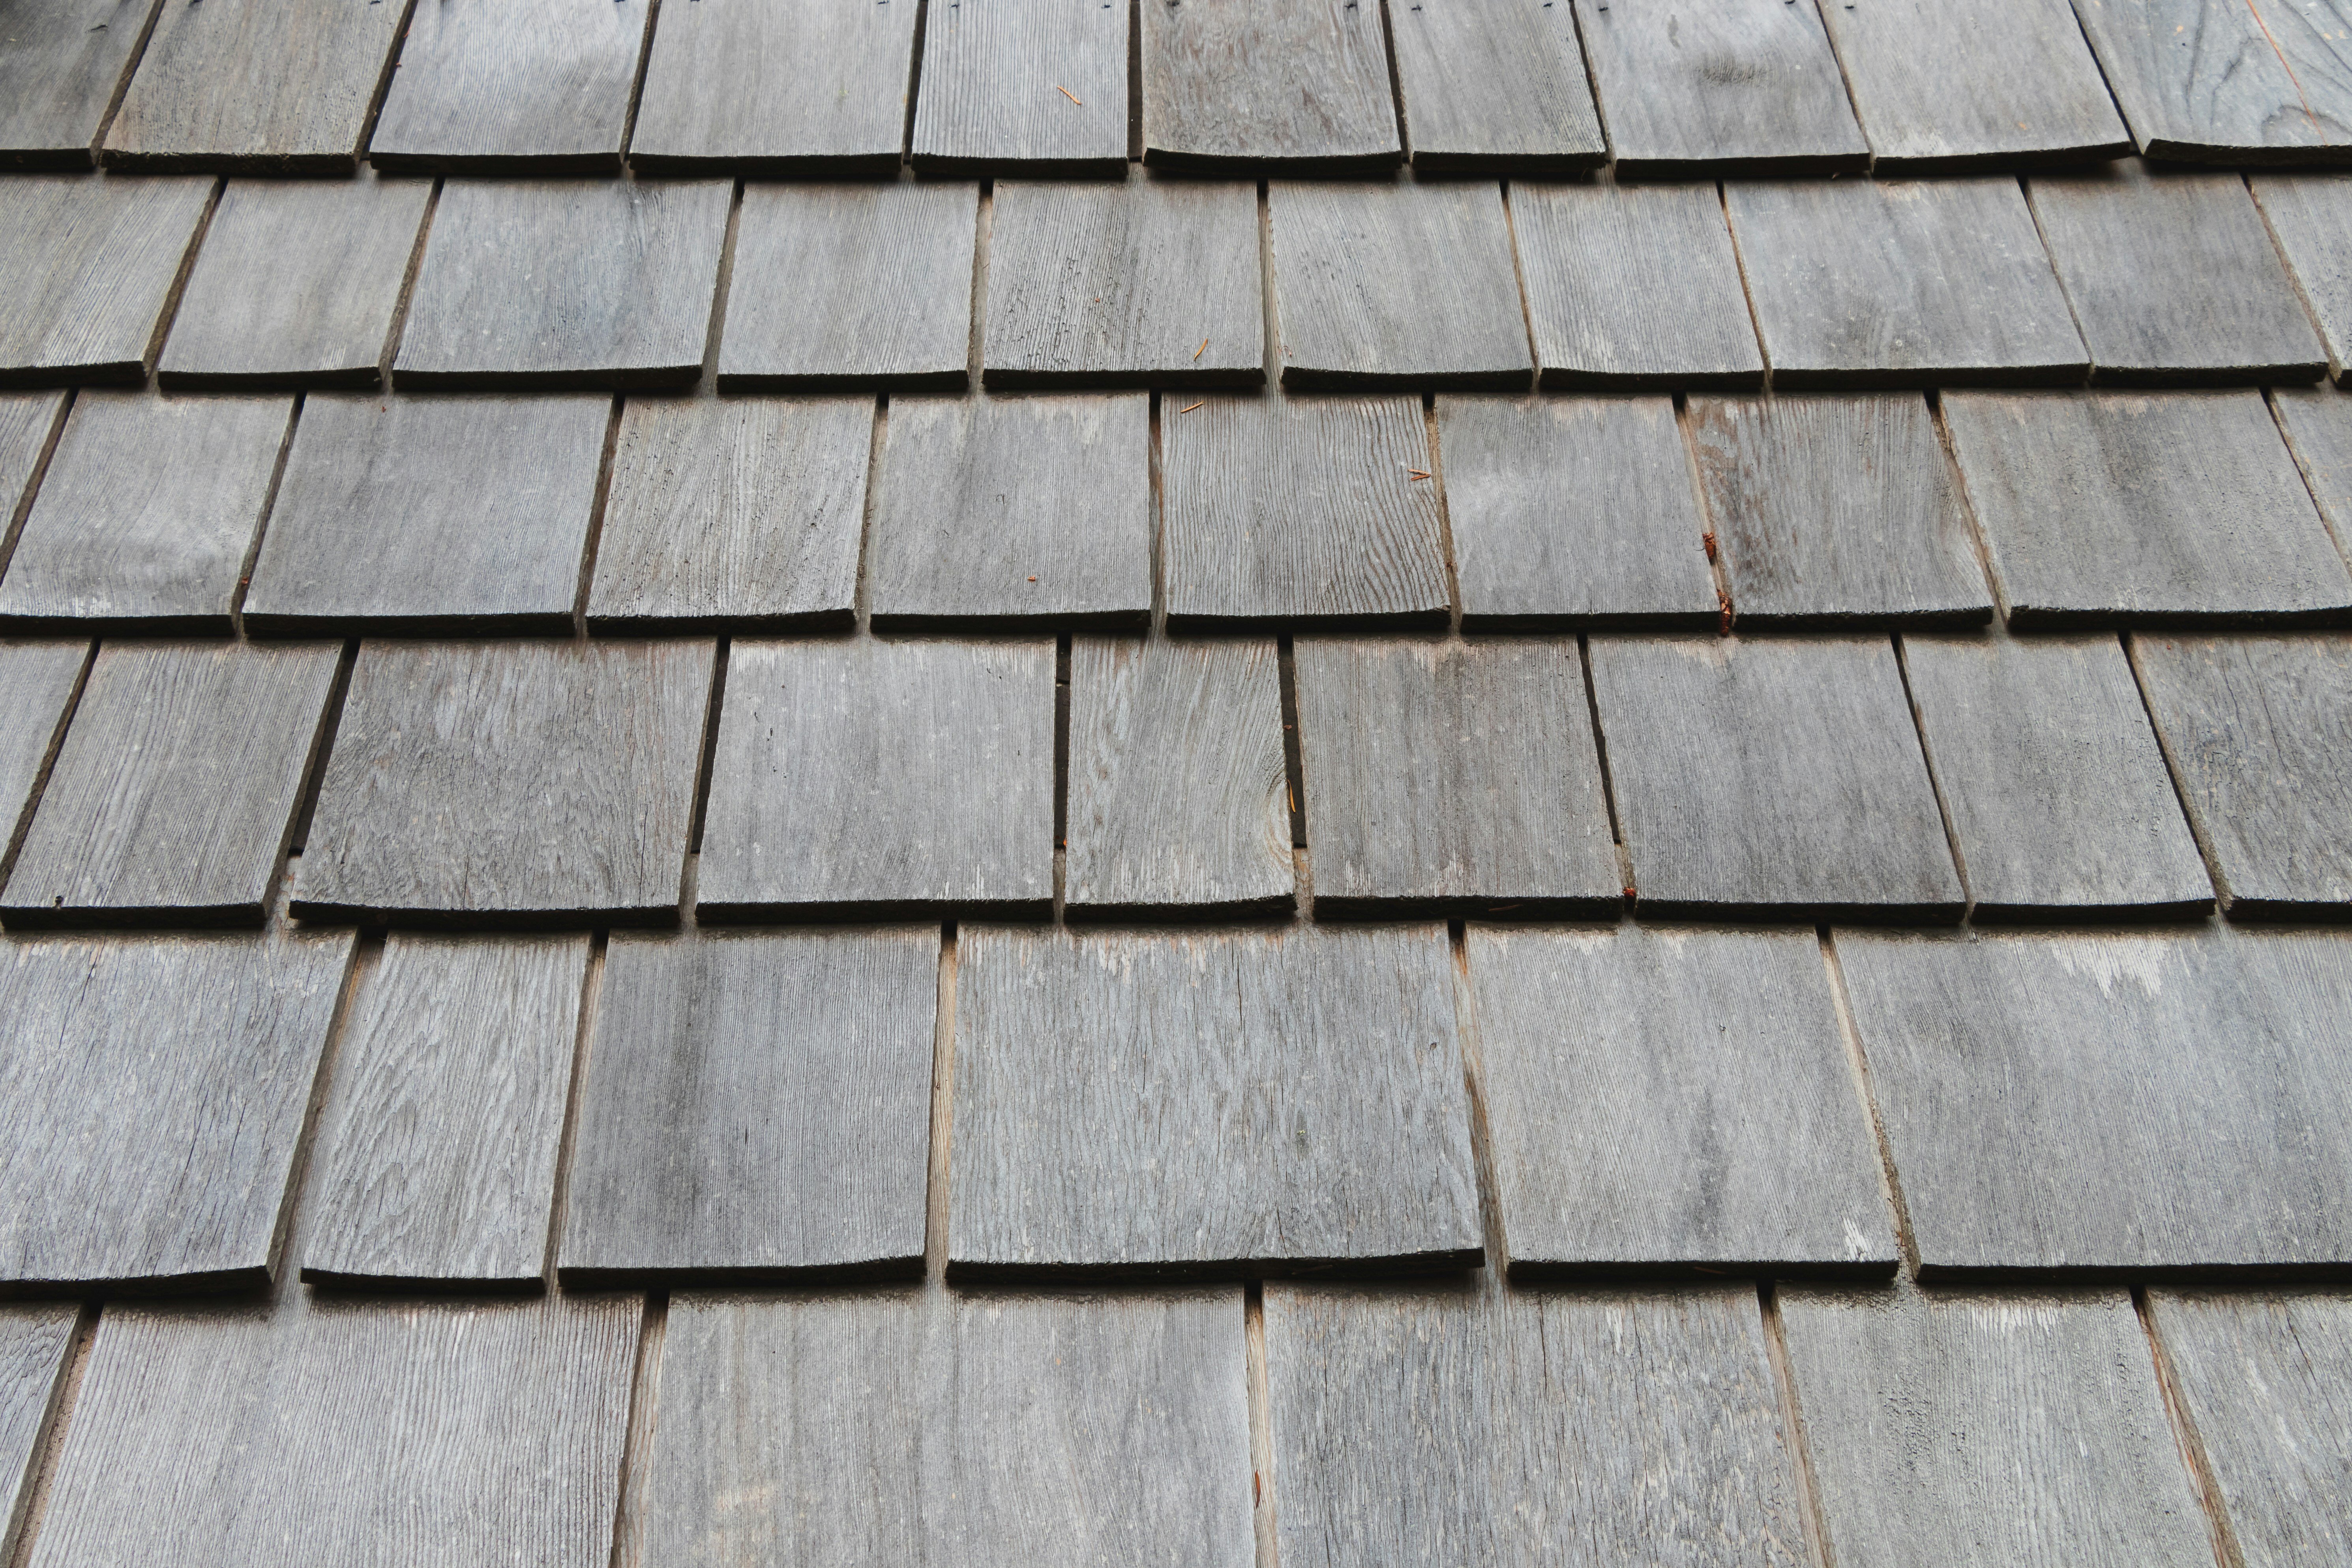 Roof Shingles That May Contain Asbestos